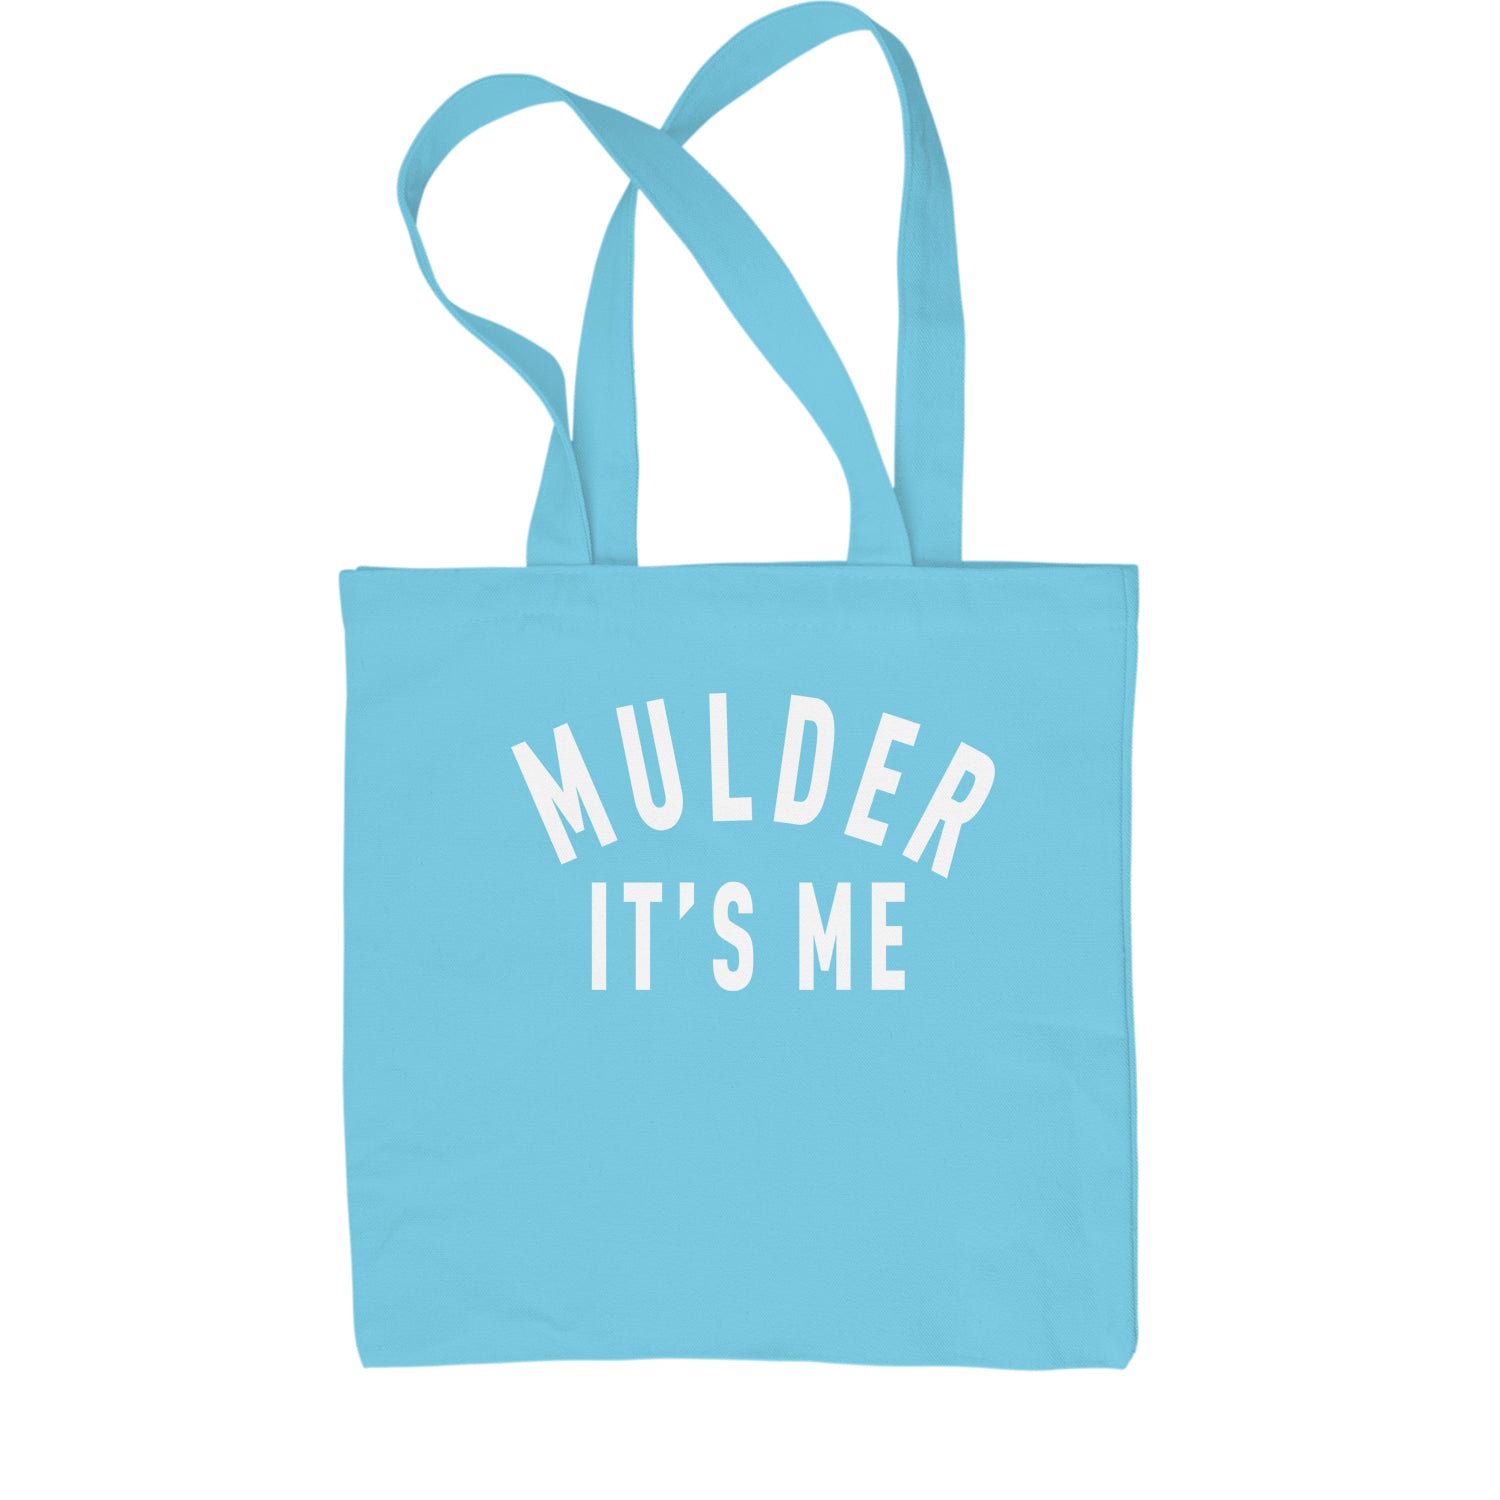 Mulder, It's Me Shopping Tote Bag 51, area, believe, files, is, mulder, out, scully, the, there, truth, x, xfiles by Expression Tees